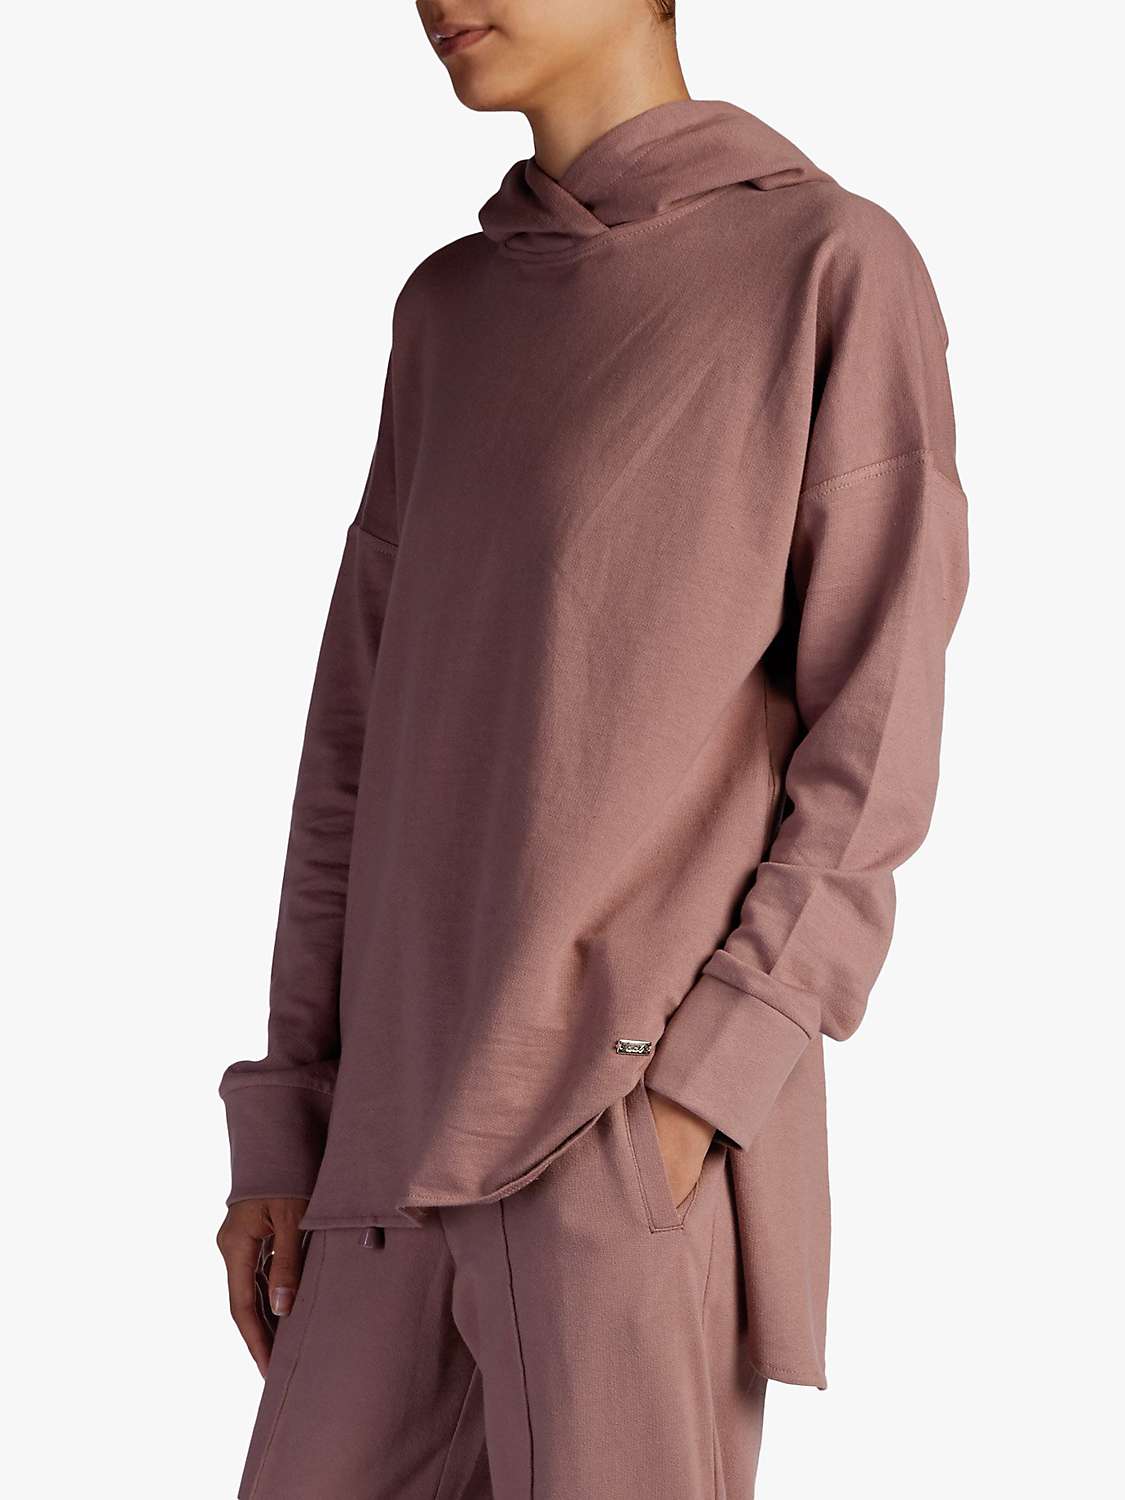 Buy Aab Cocoon Cotton Hoody Online at johnlewis.com